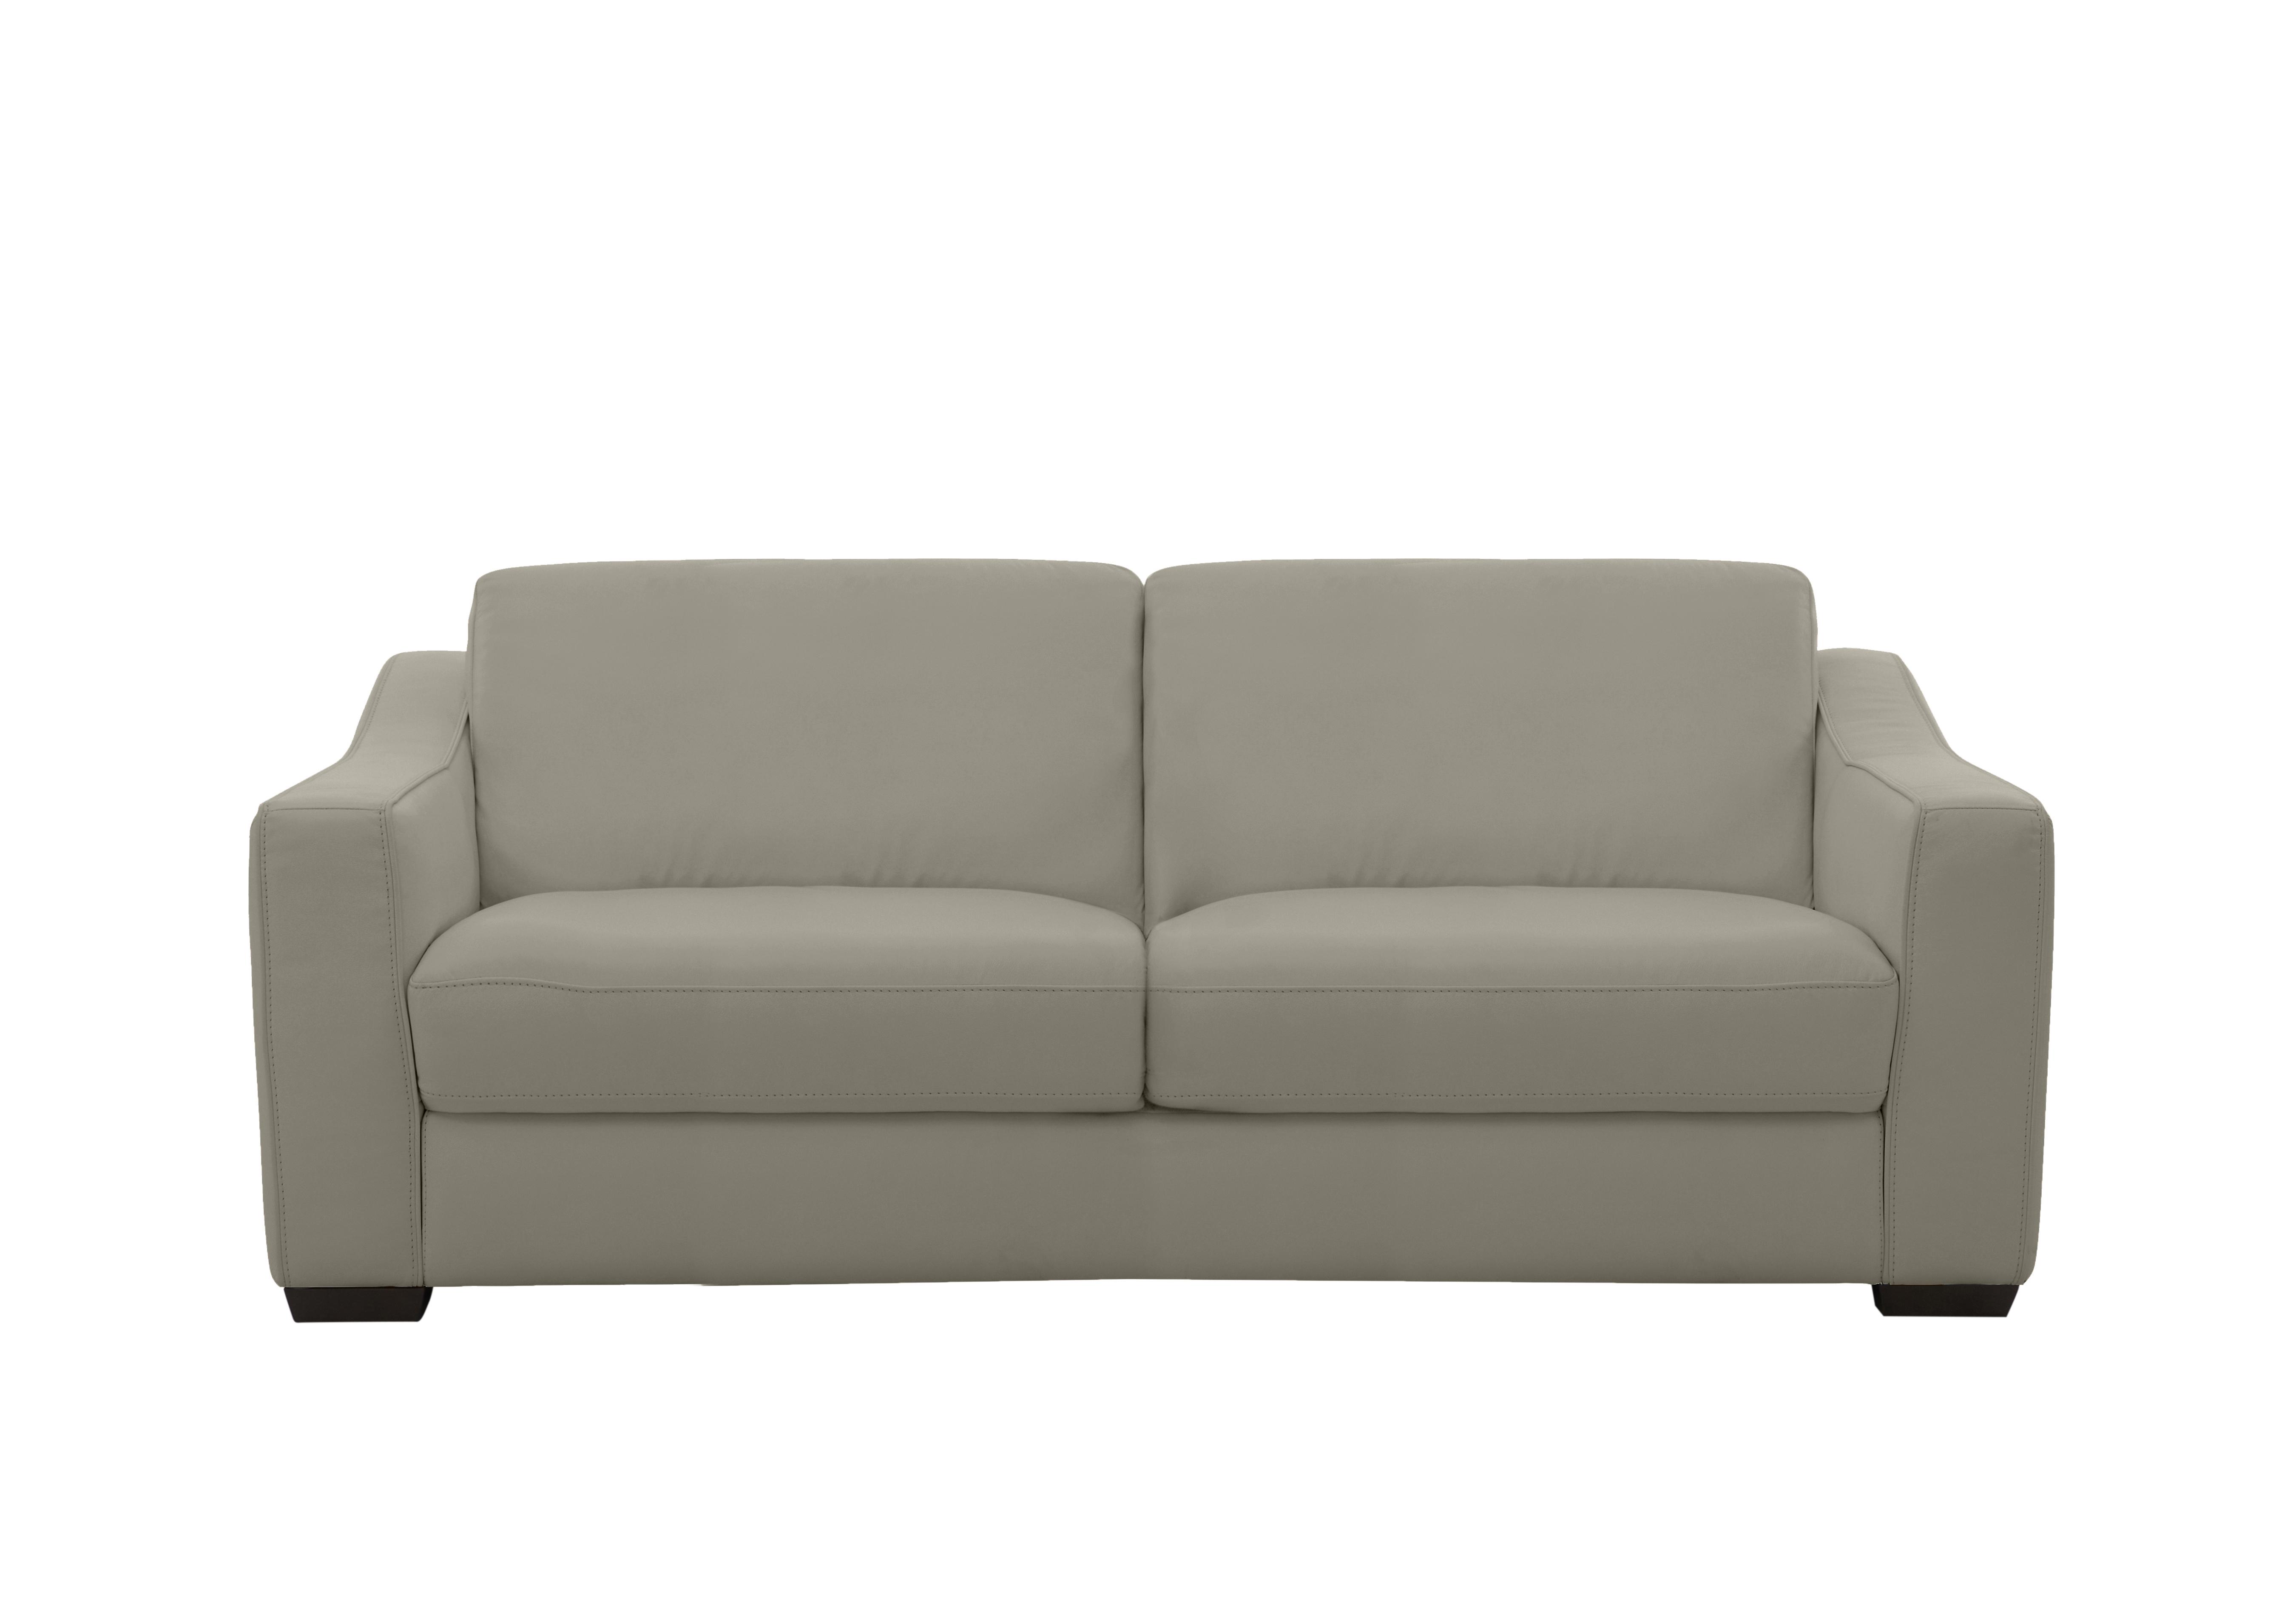 Optimus Space Saving Leather Sofa Bed with Memory Foam Mattress in Bv-946b Silver Grey on Furniture Village